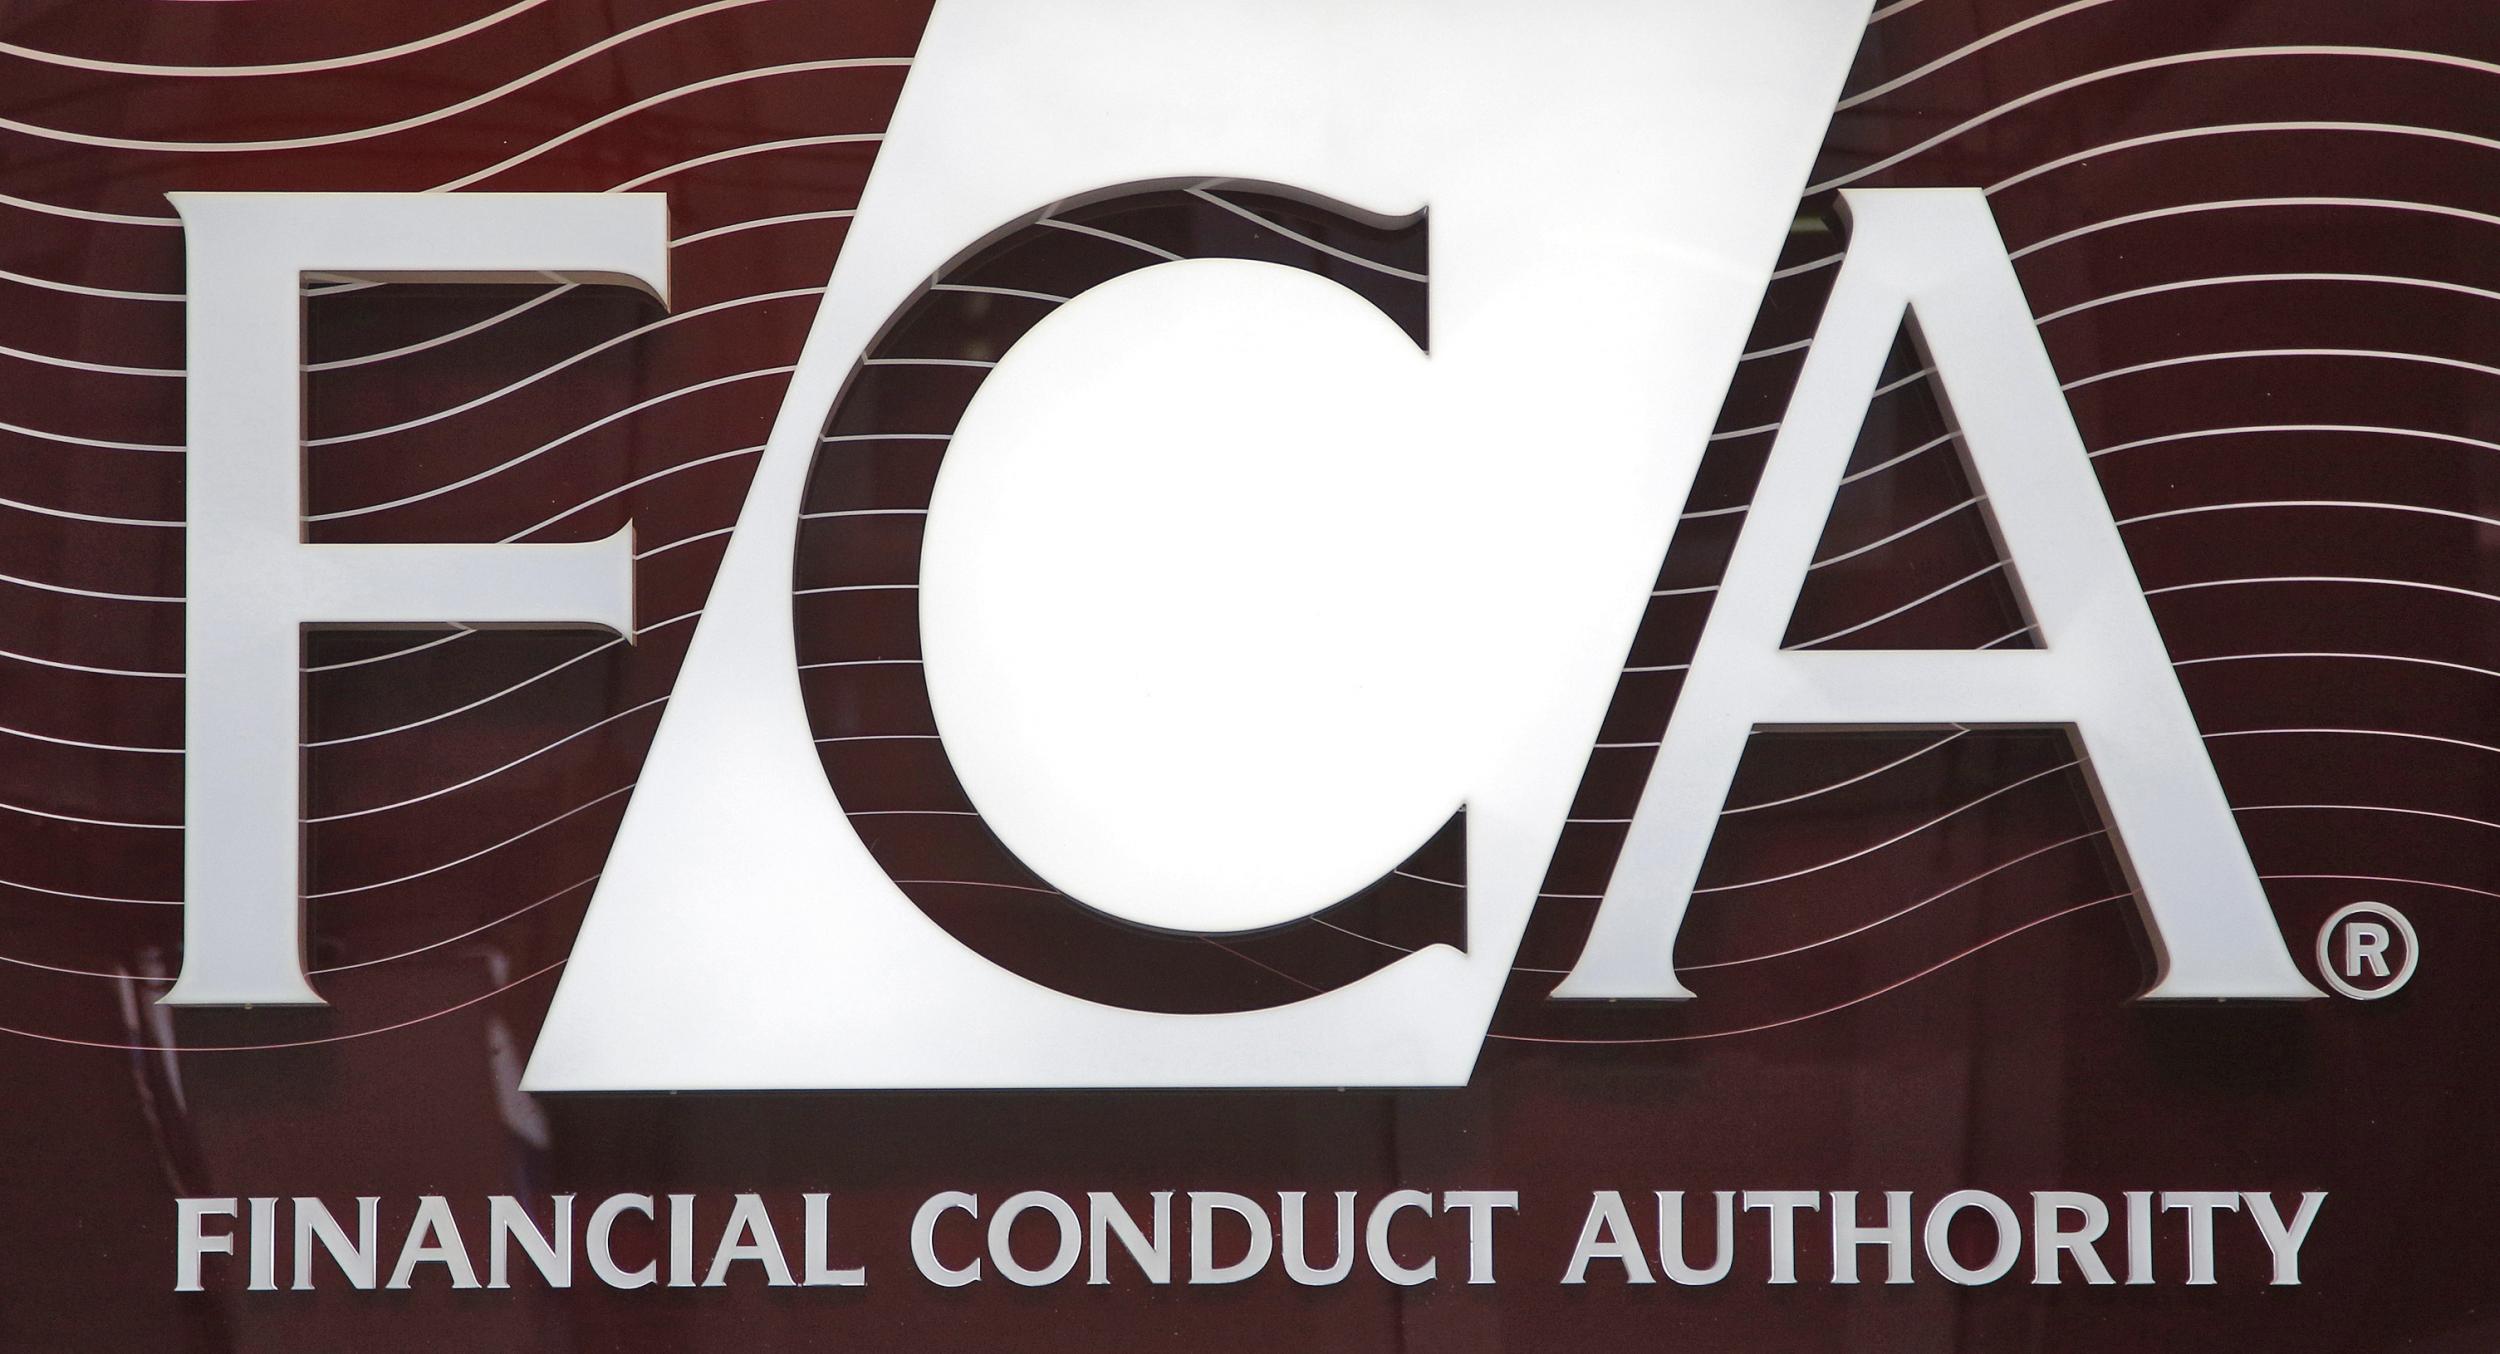 The FCA said it may take further action against RBS